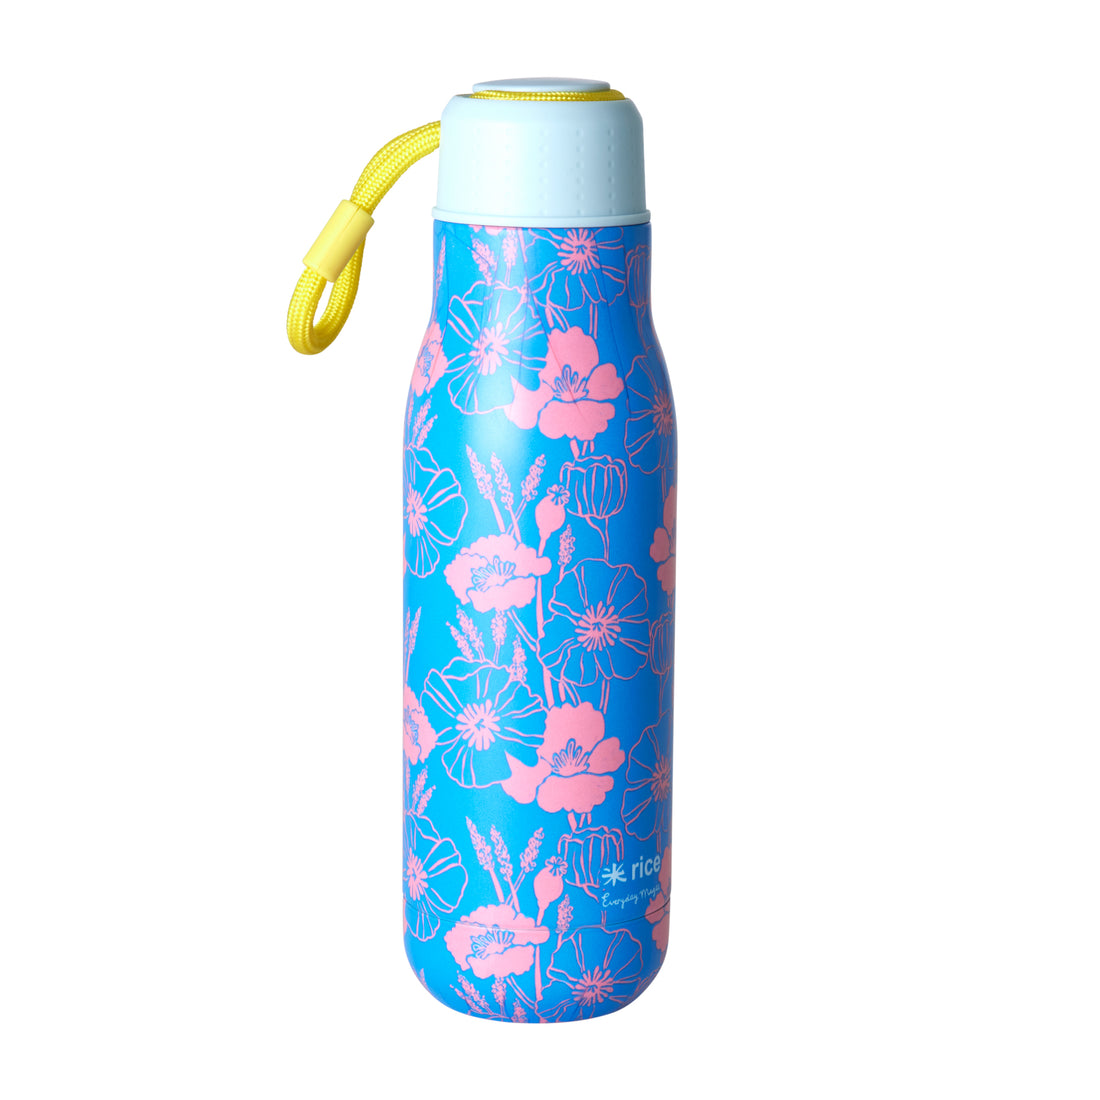 rice-dk-stainless-steel-drinking-bottle-with-poppie-love-print-rice-stbot-polo-